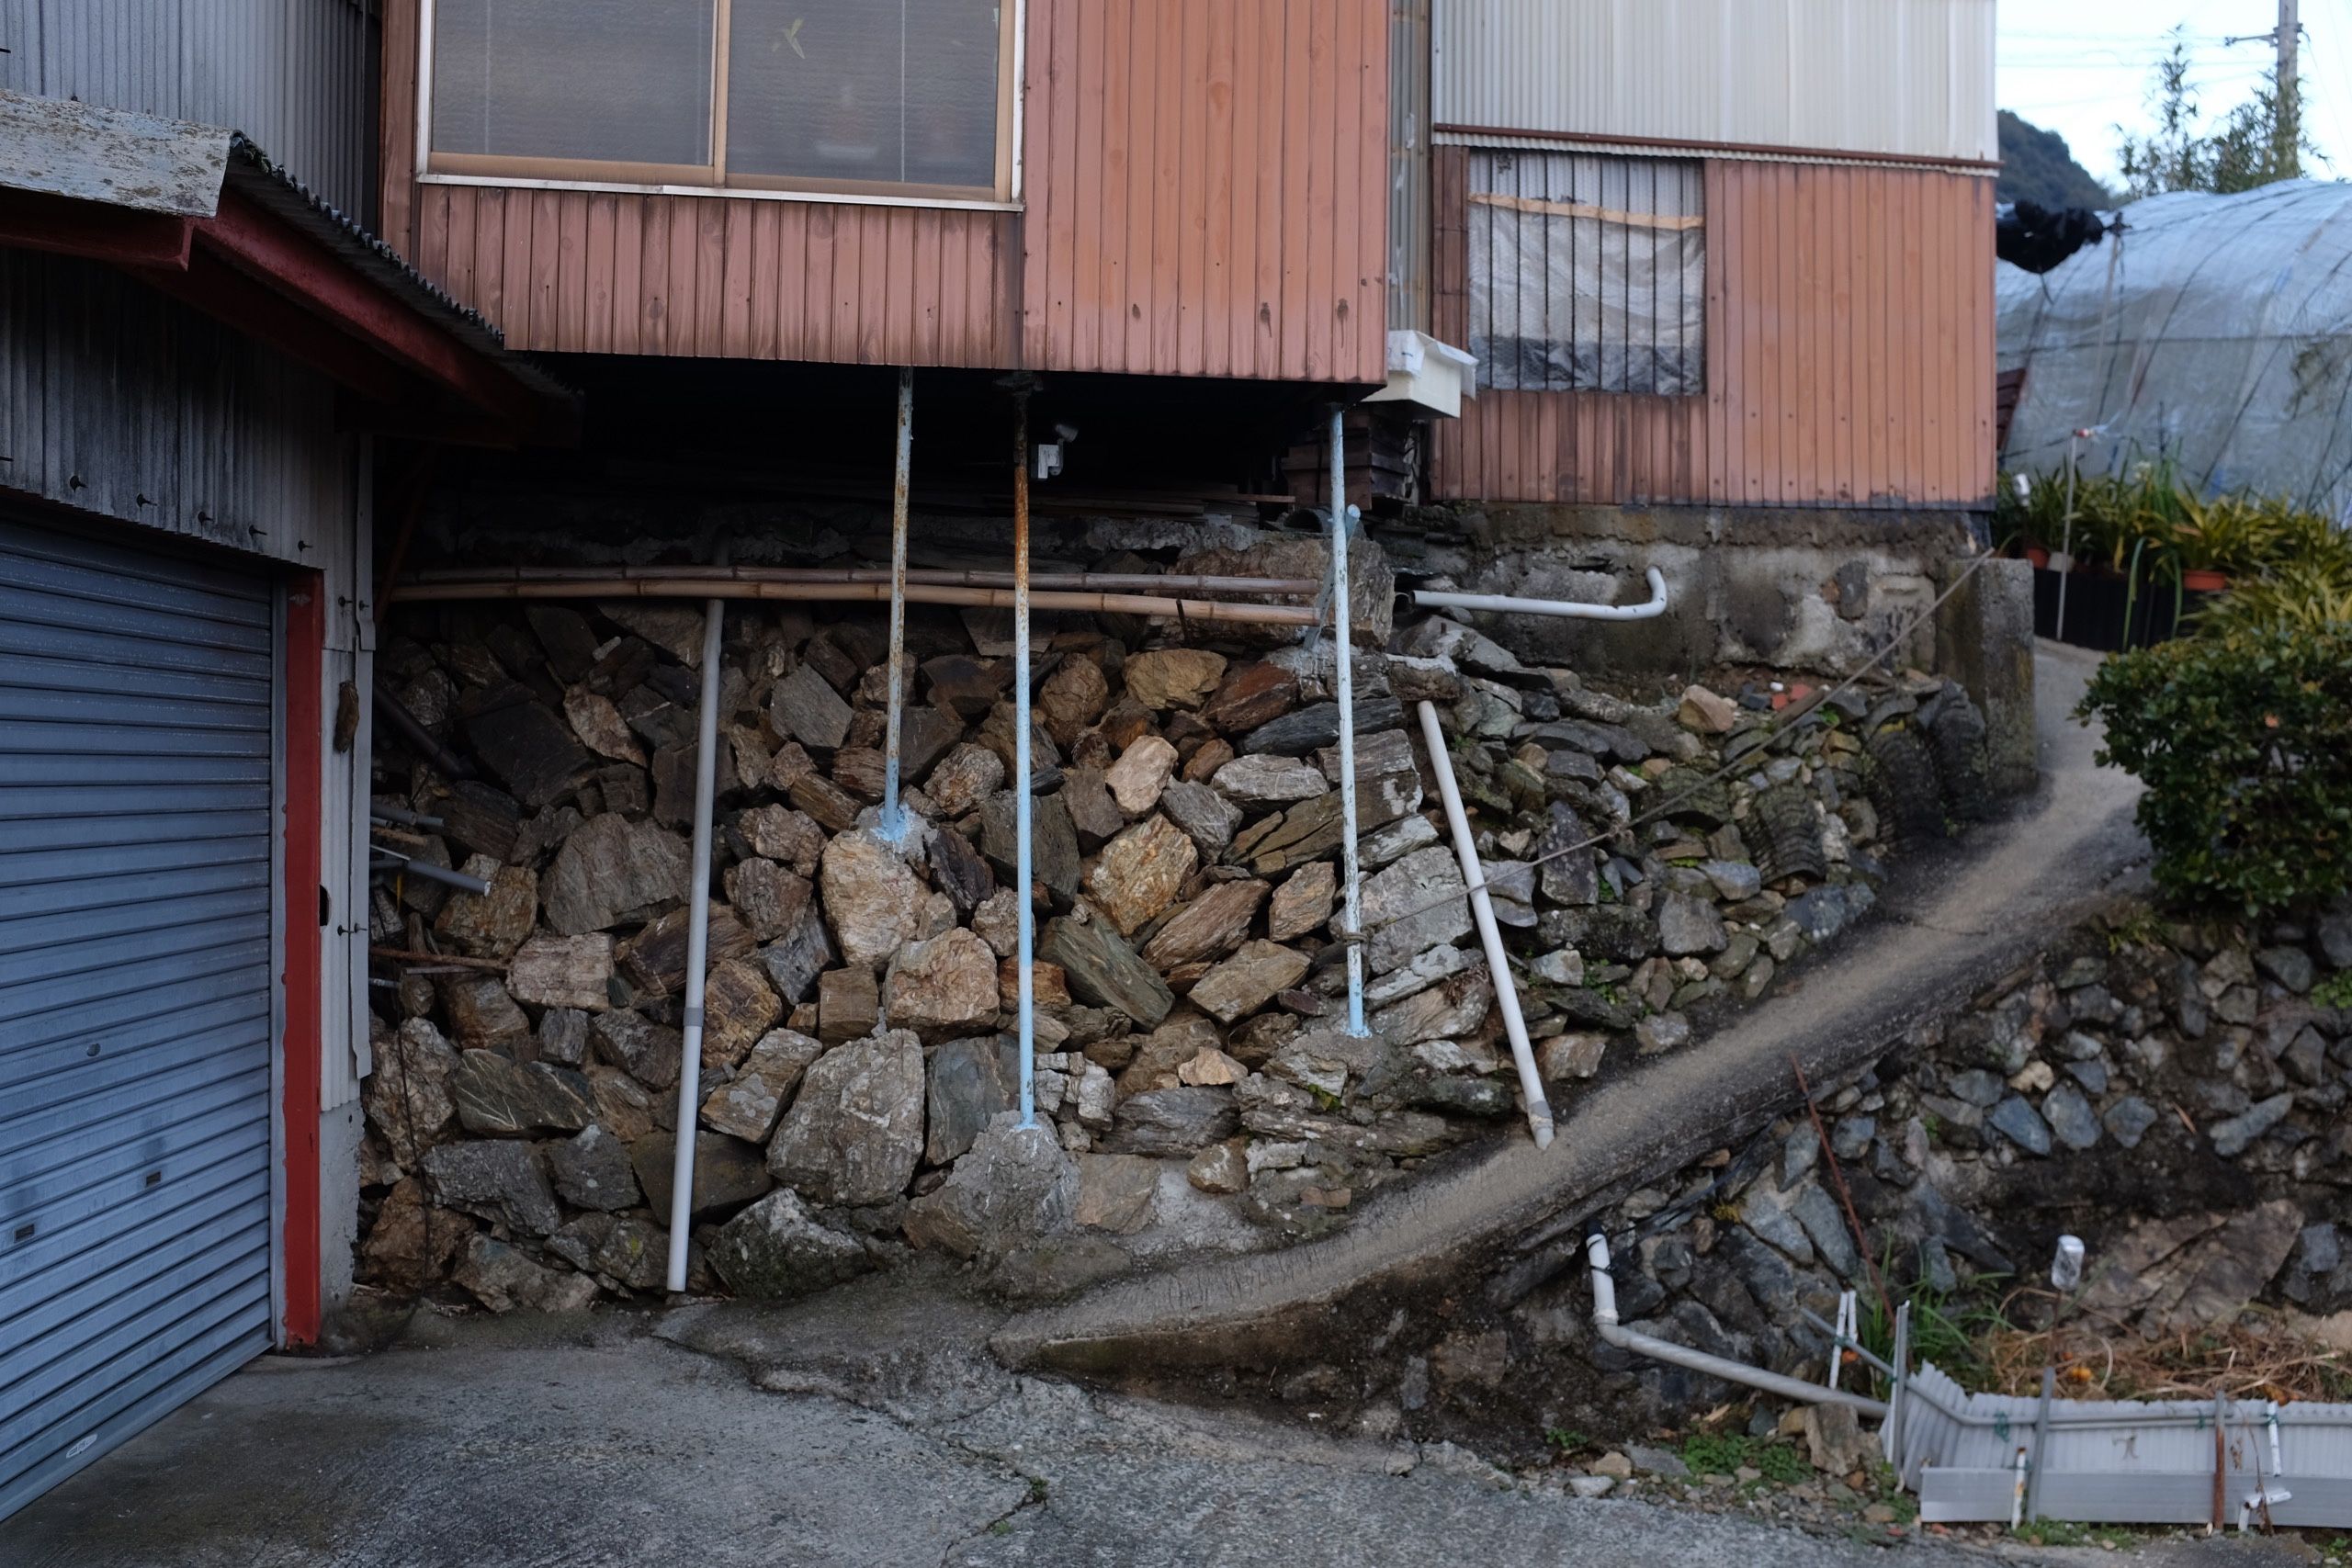 A stone wall underneath a village house, similar to but less elaborate than that of the Garyū Mountain Villa above.